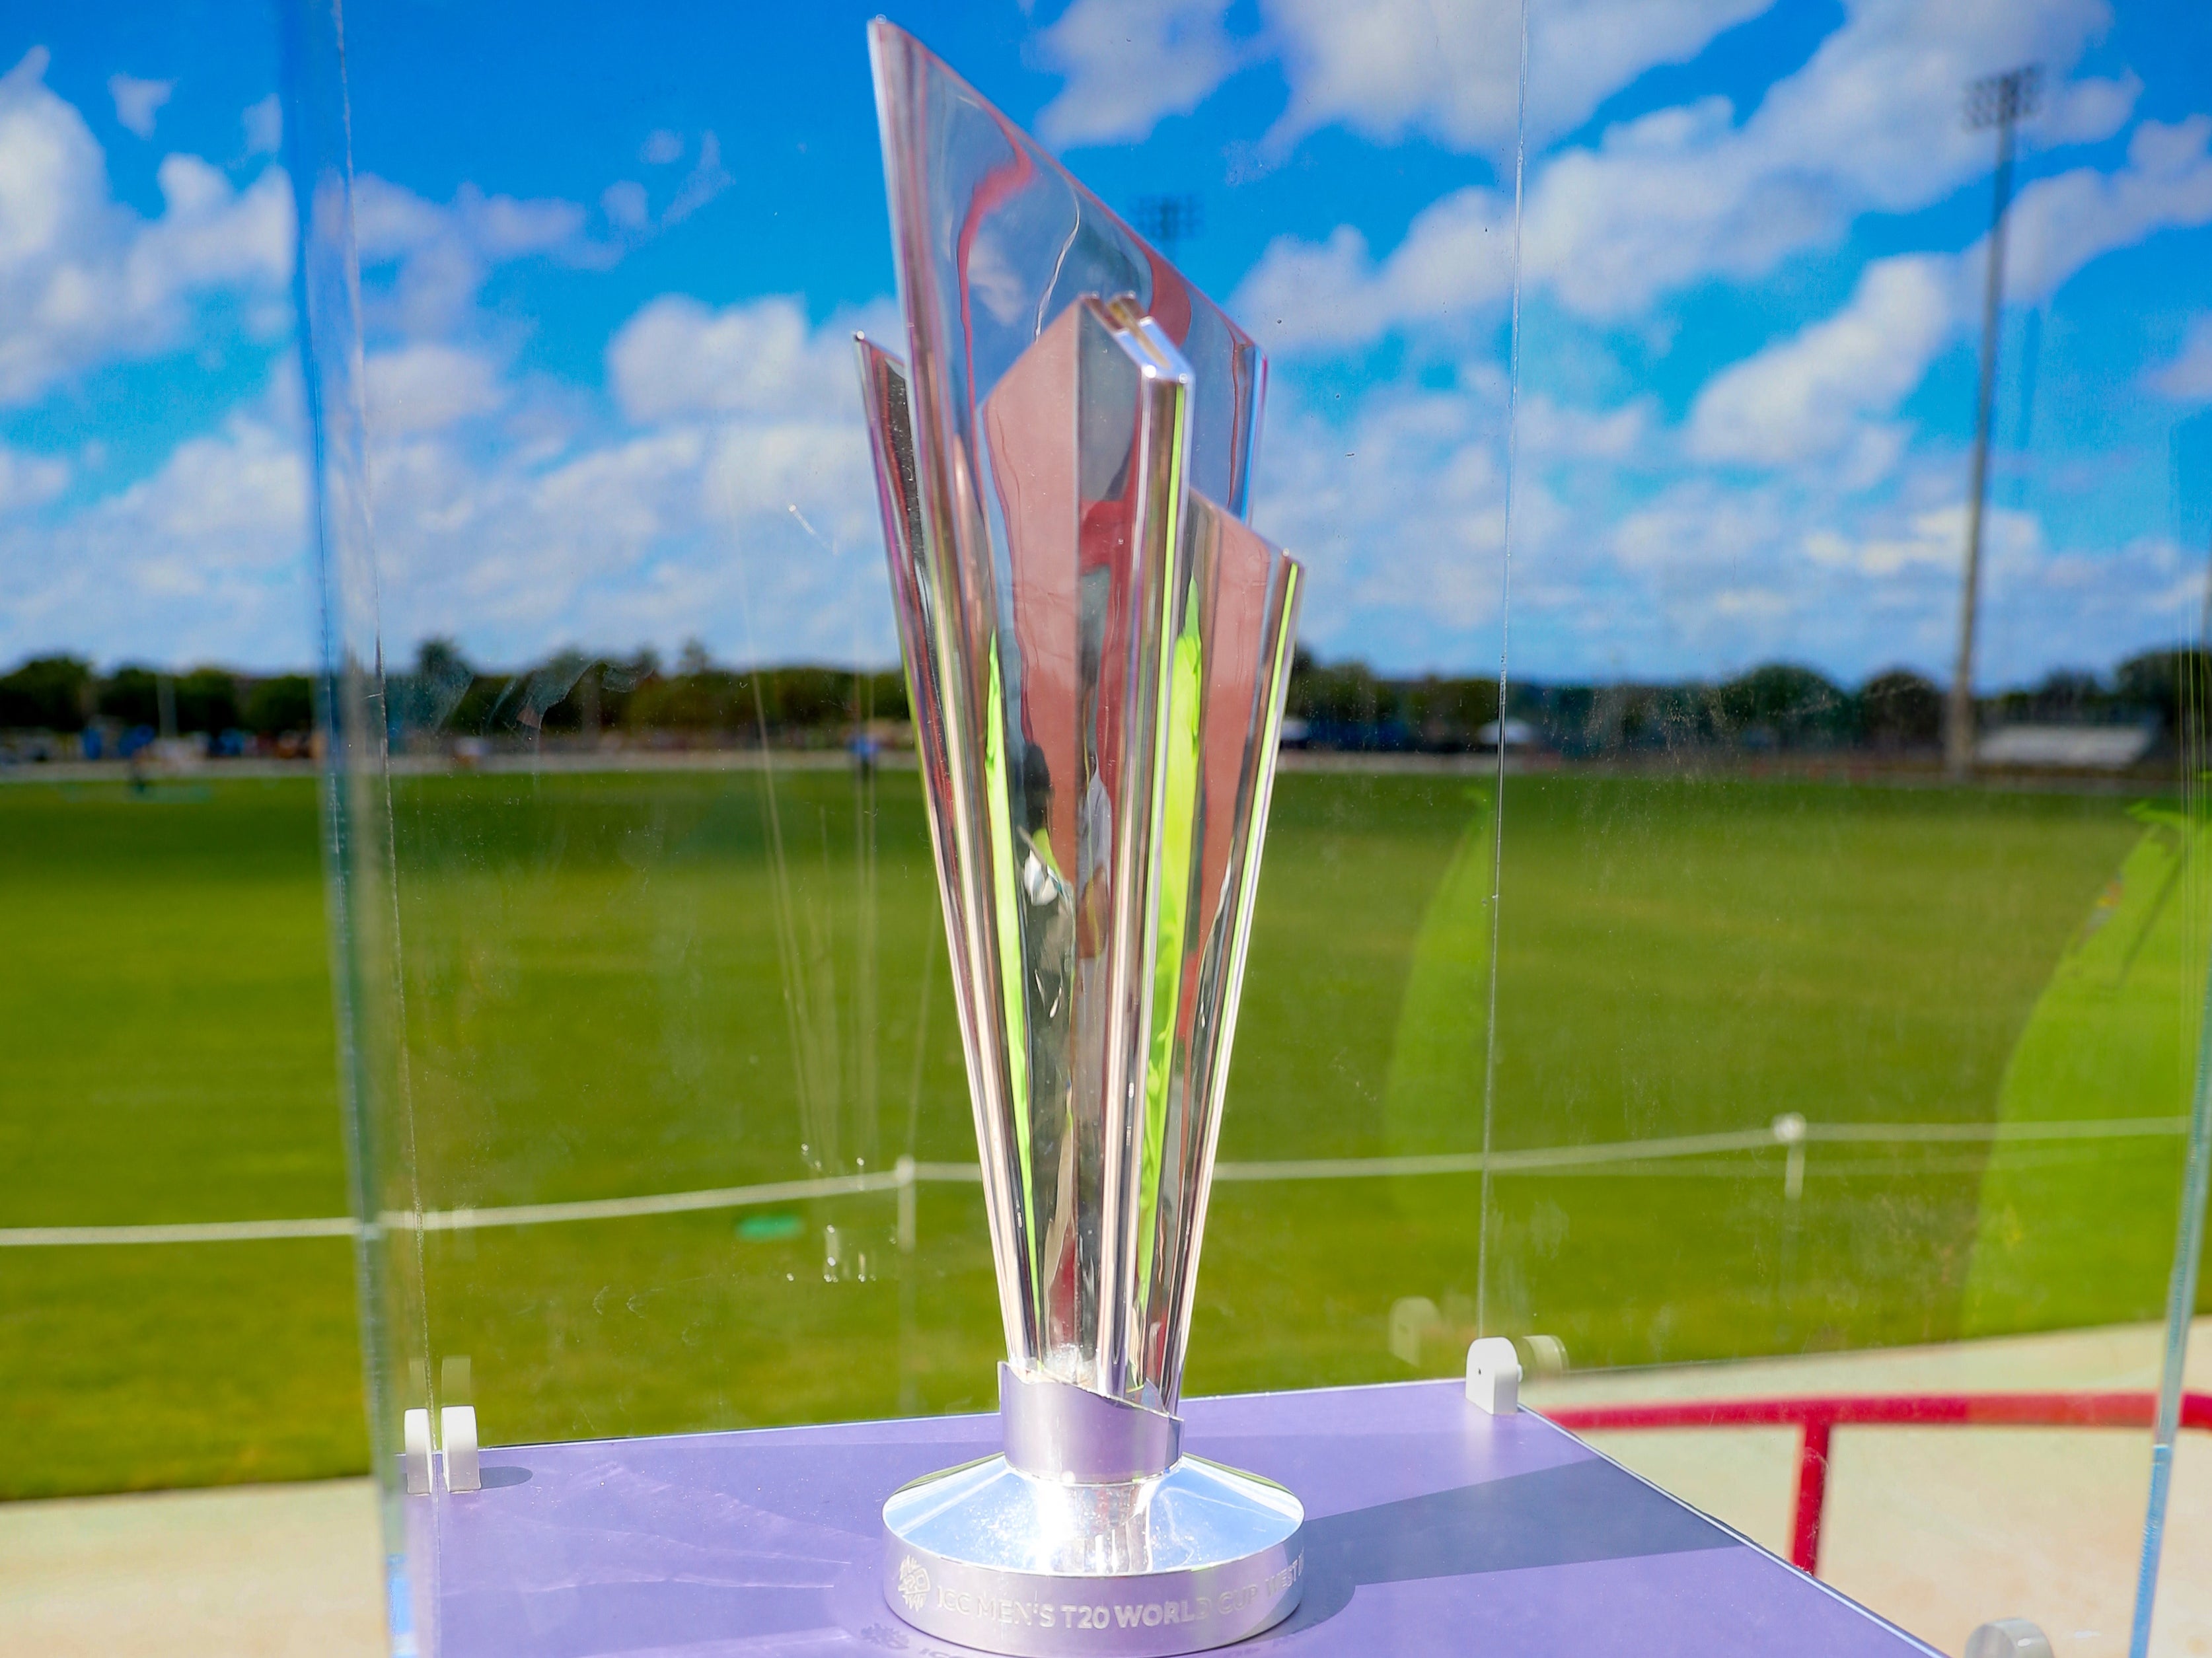 The 20 nations will all compete to lift the ICC Men’s T20 World Cup trophy when the competition begins on June 1.